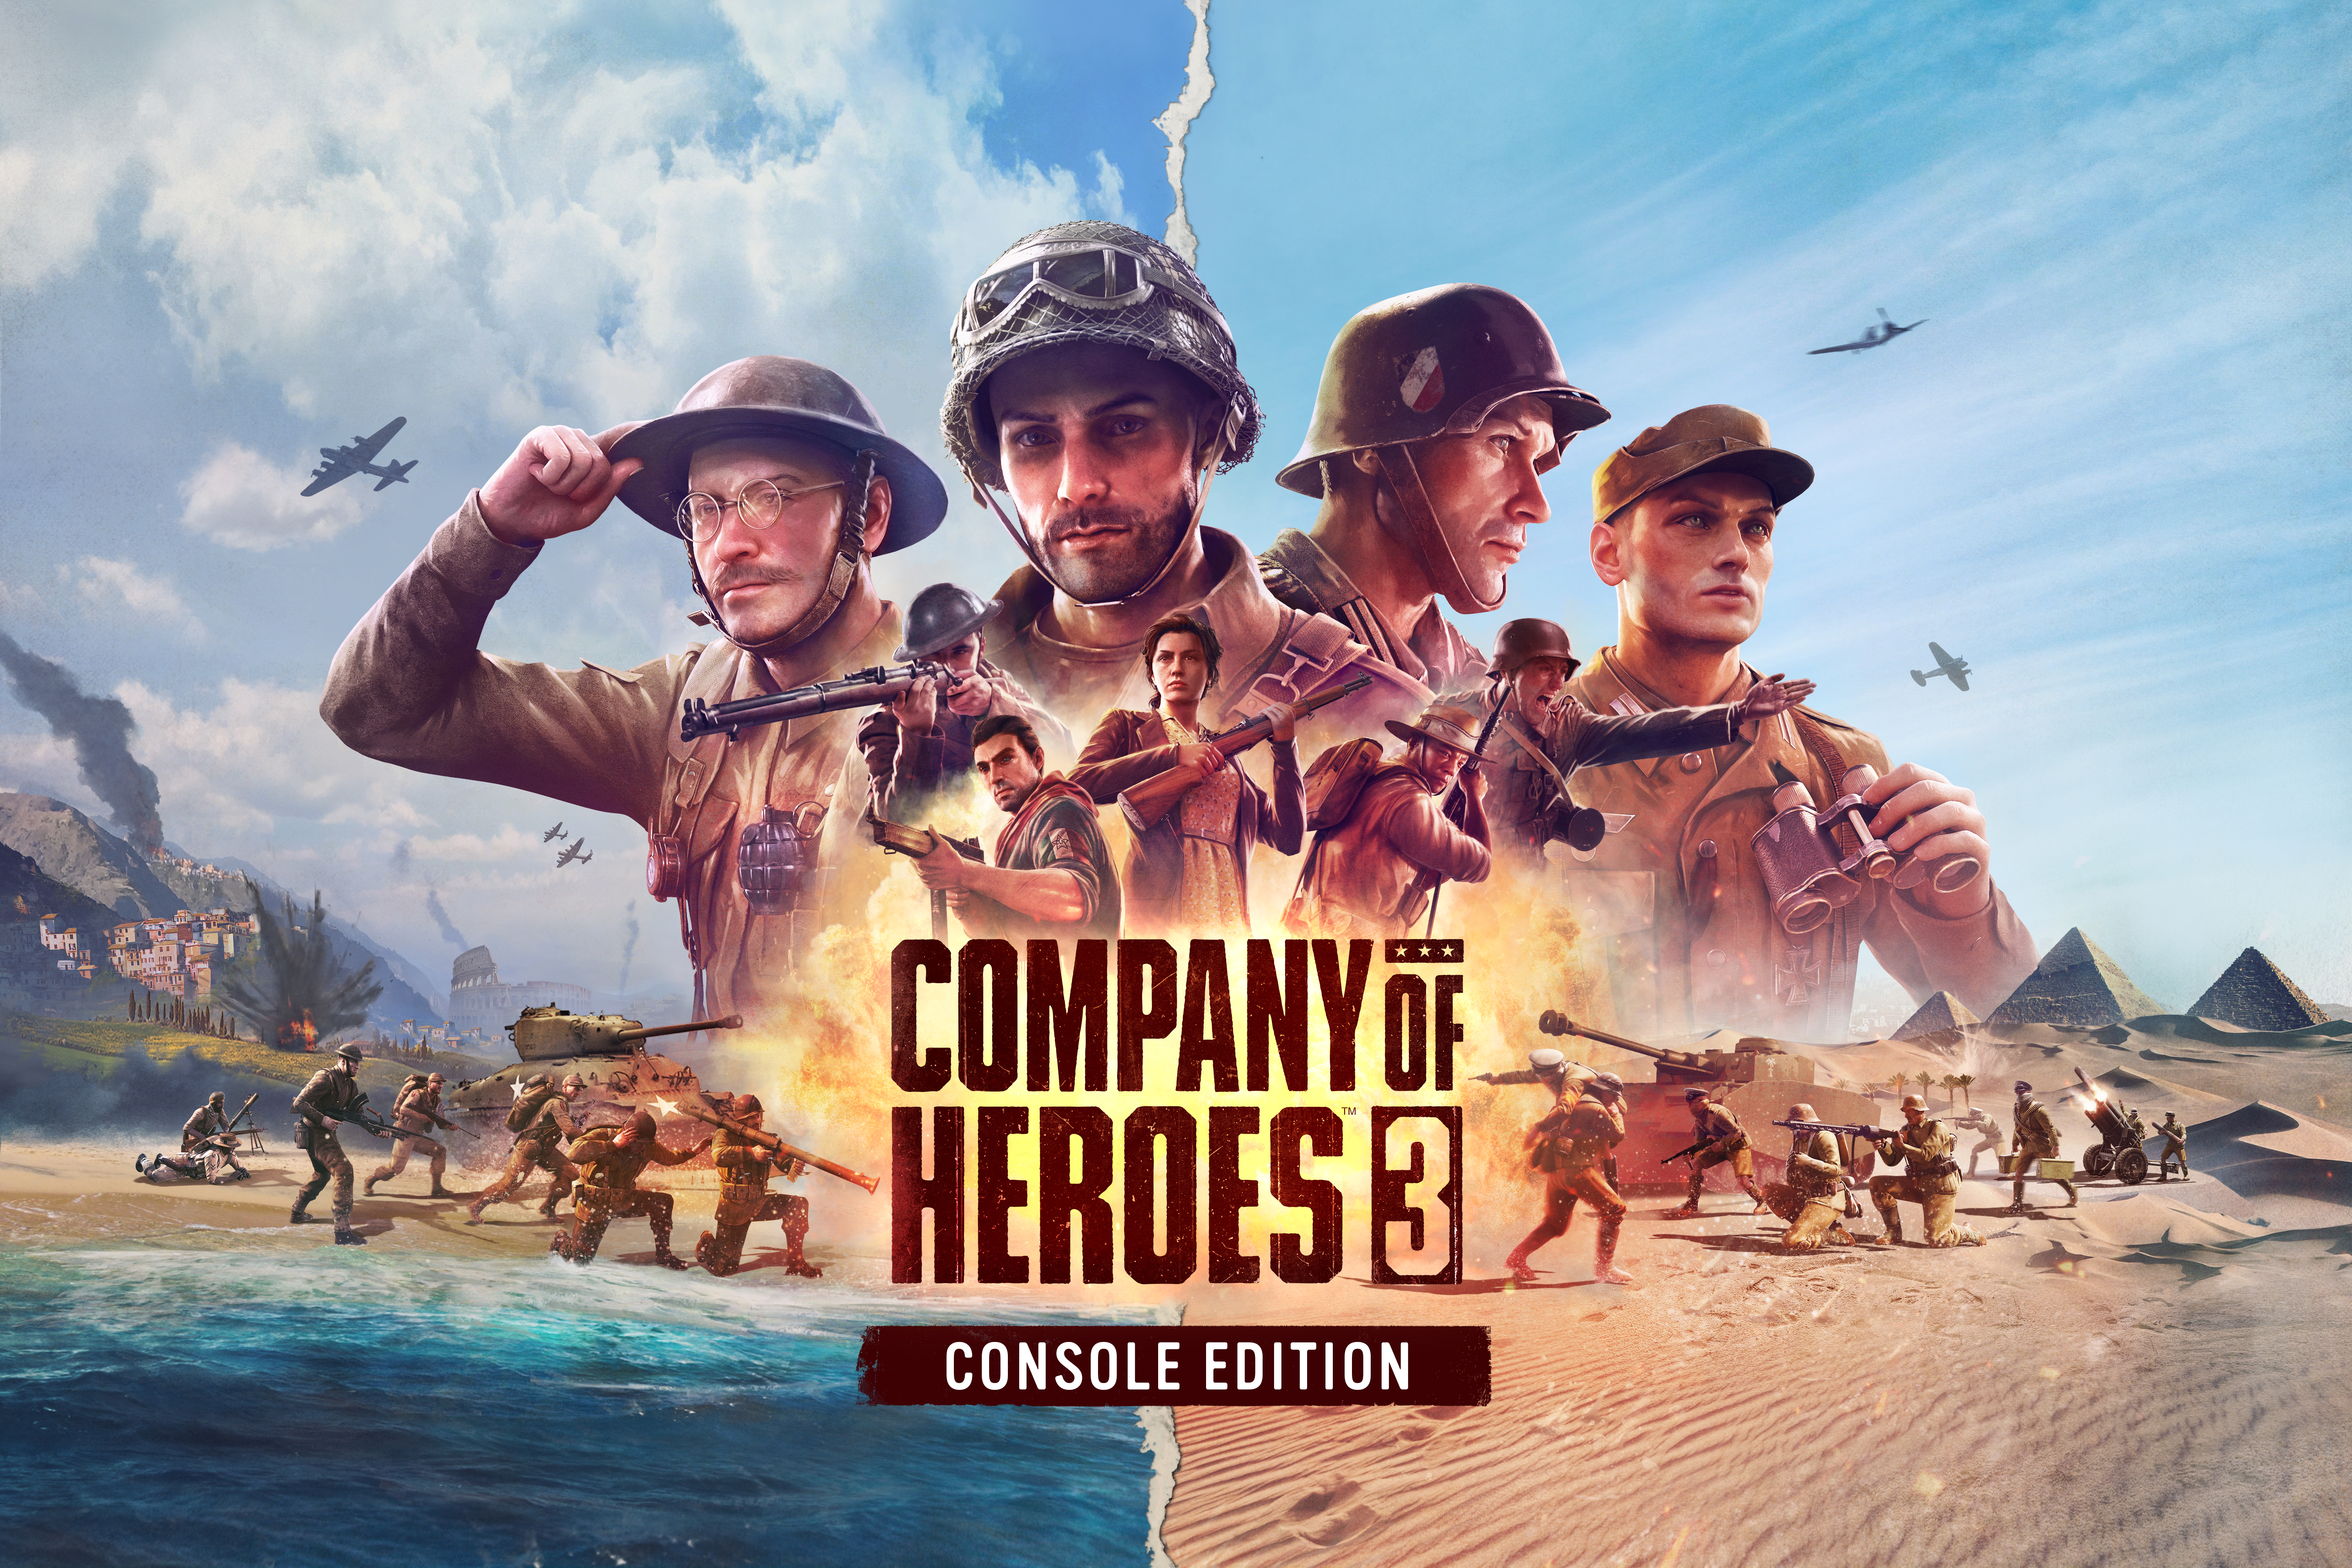 Company of Heroes from Sega is Coming to Console